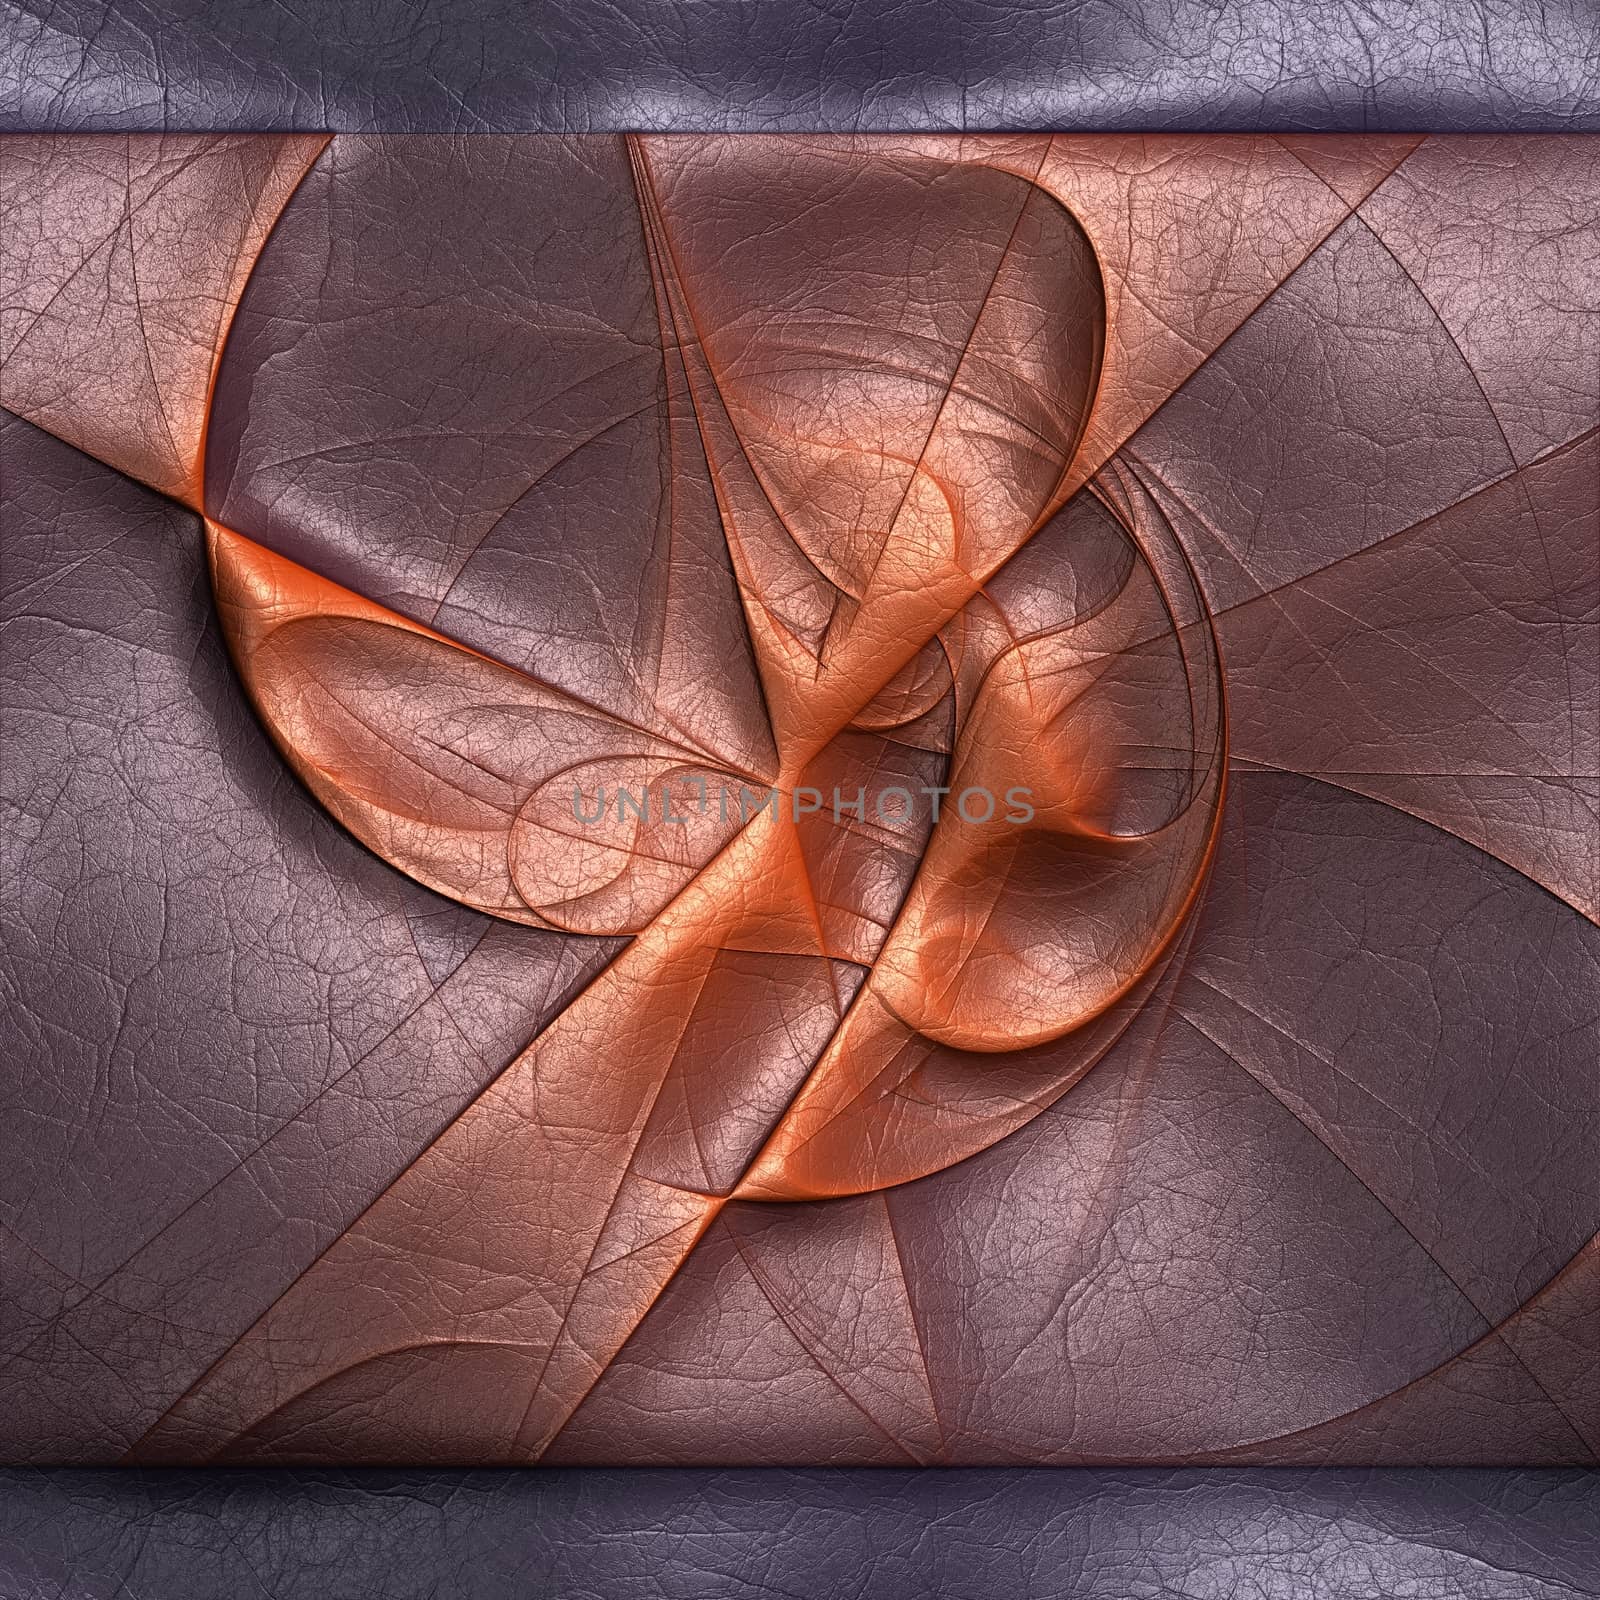 Luxury background with embossed pattern on leather by stocklady